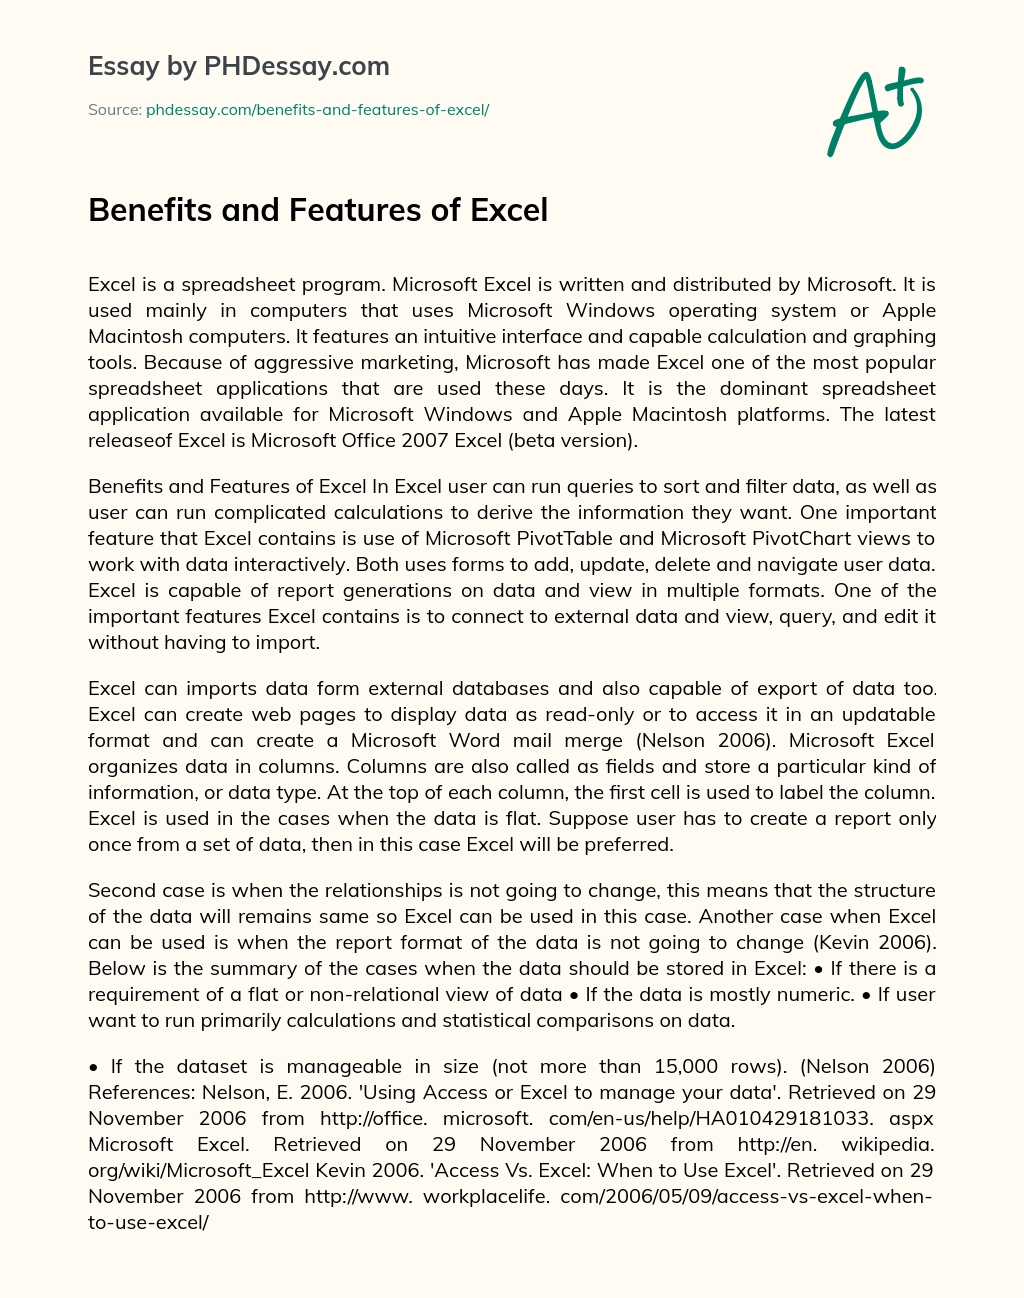 Benefits and Features of Excel essay